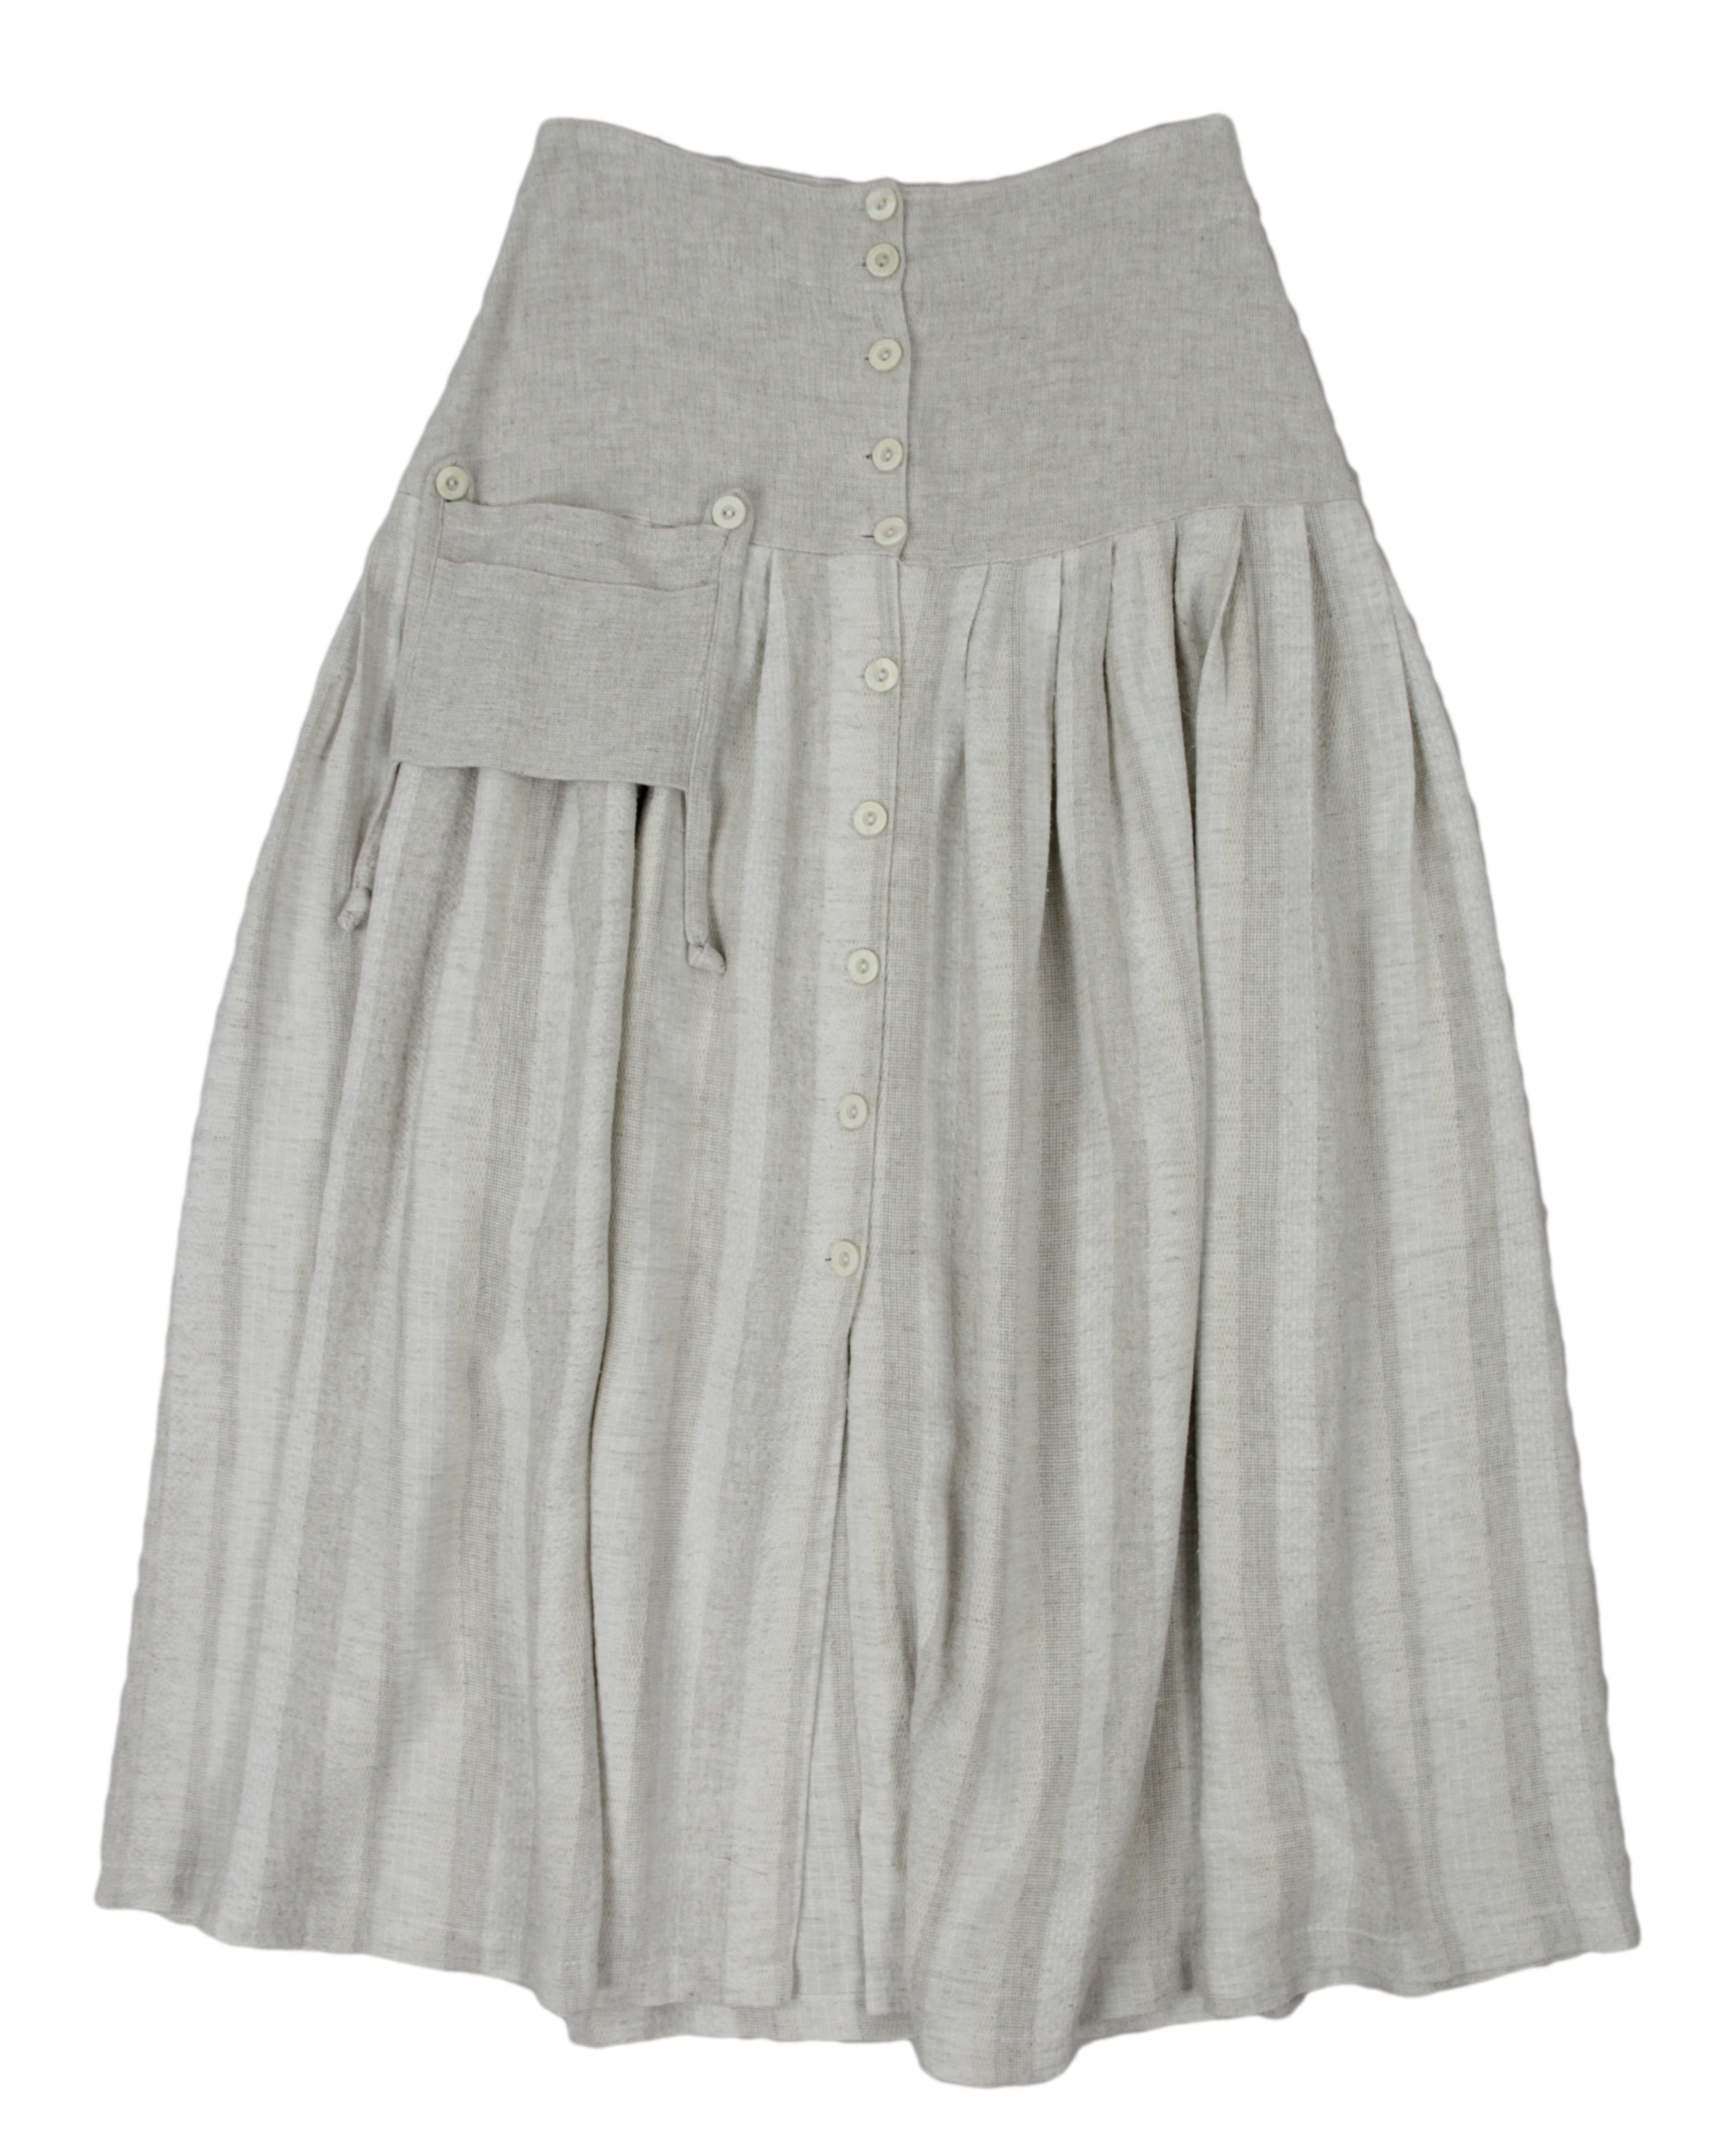 Vintage Button Front Mediterranean Peasant Skirt from Antibes, France, SIZE S